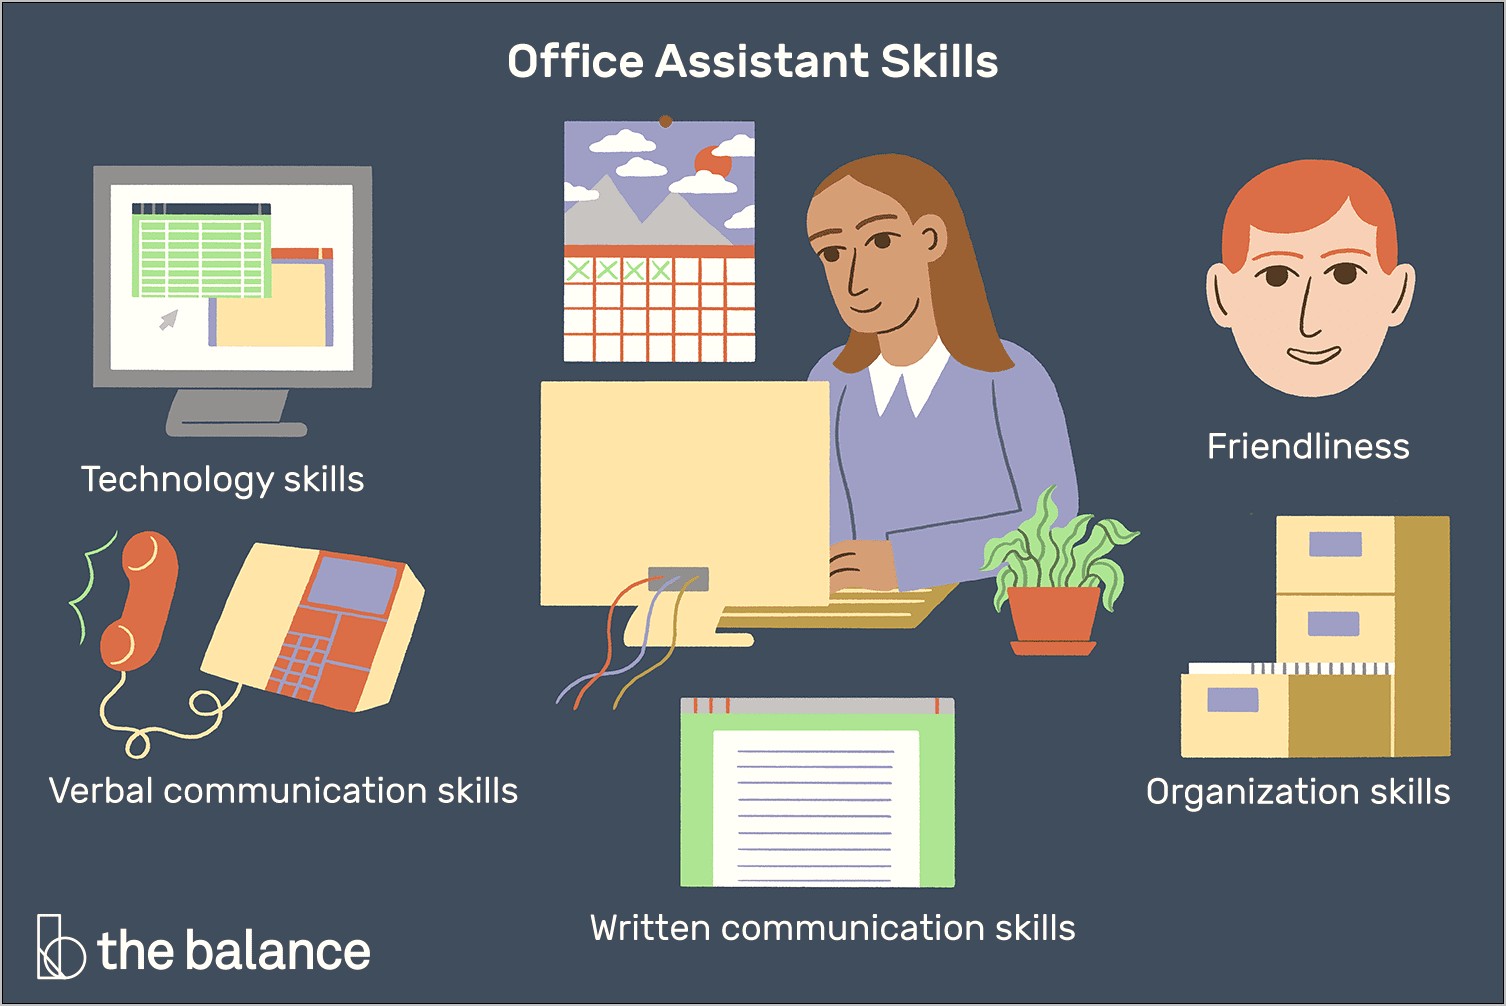 Executive Assistant Skills To Put On A Resume